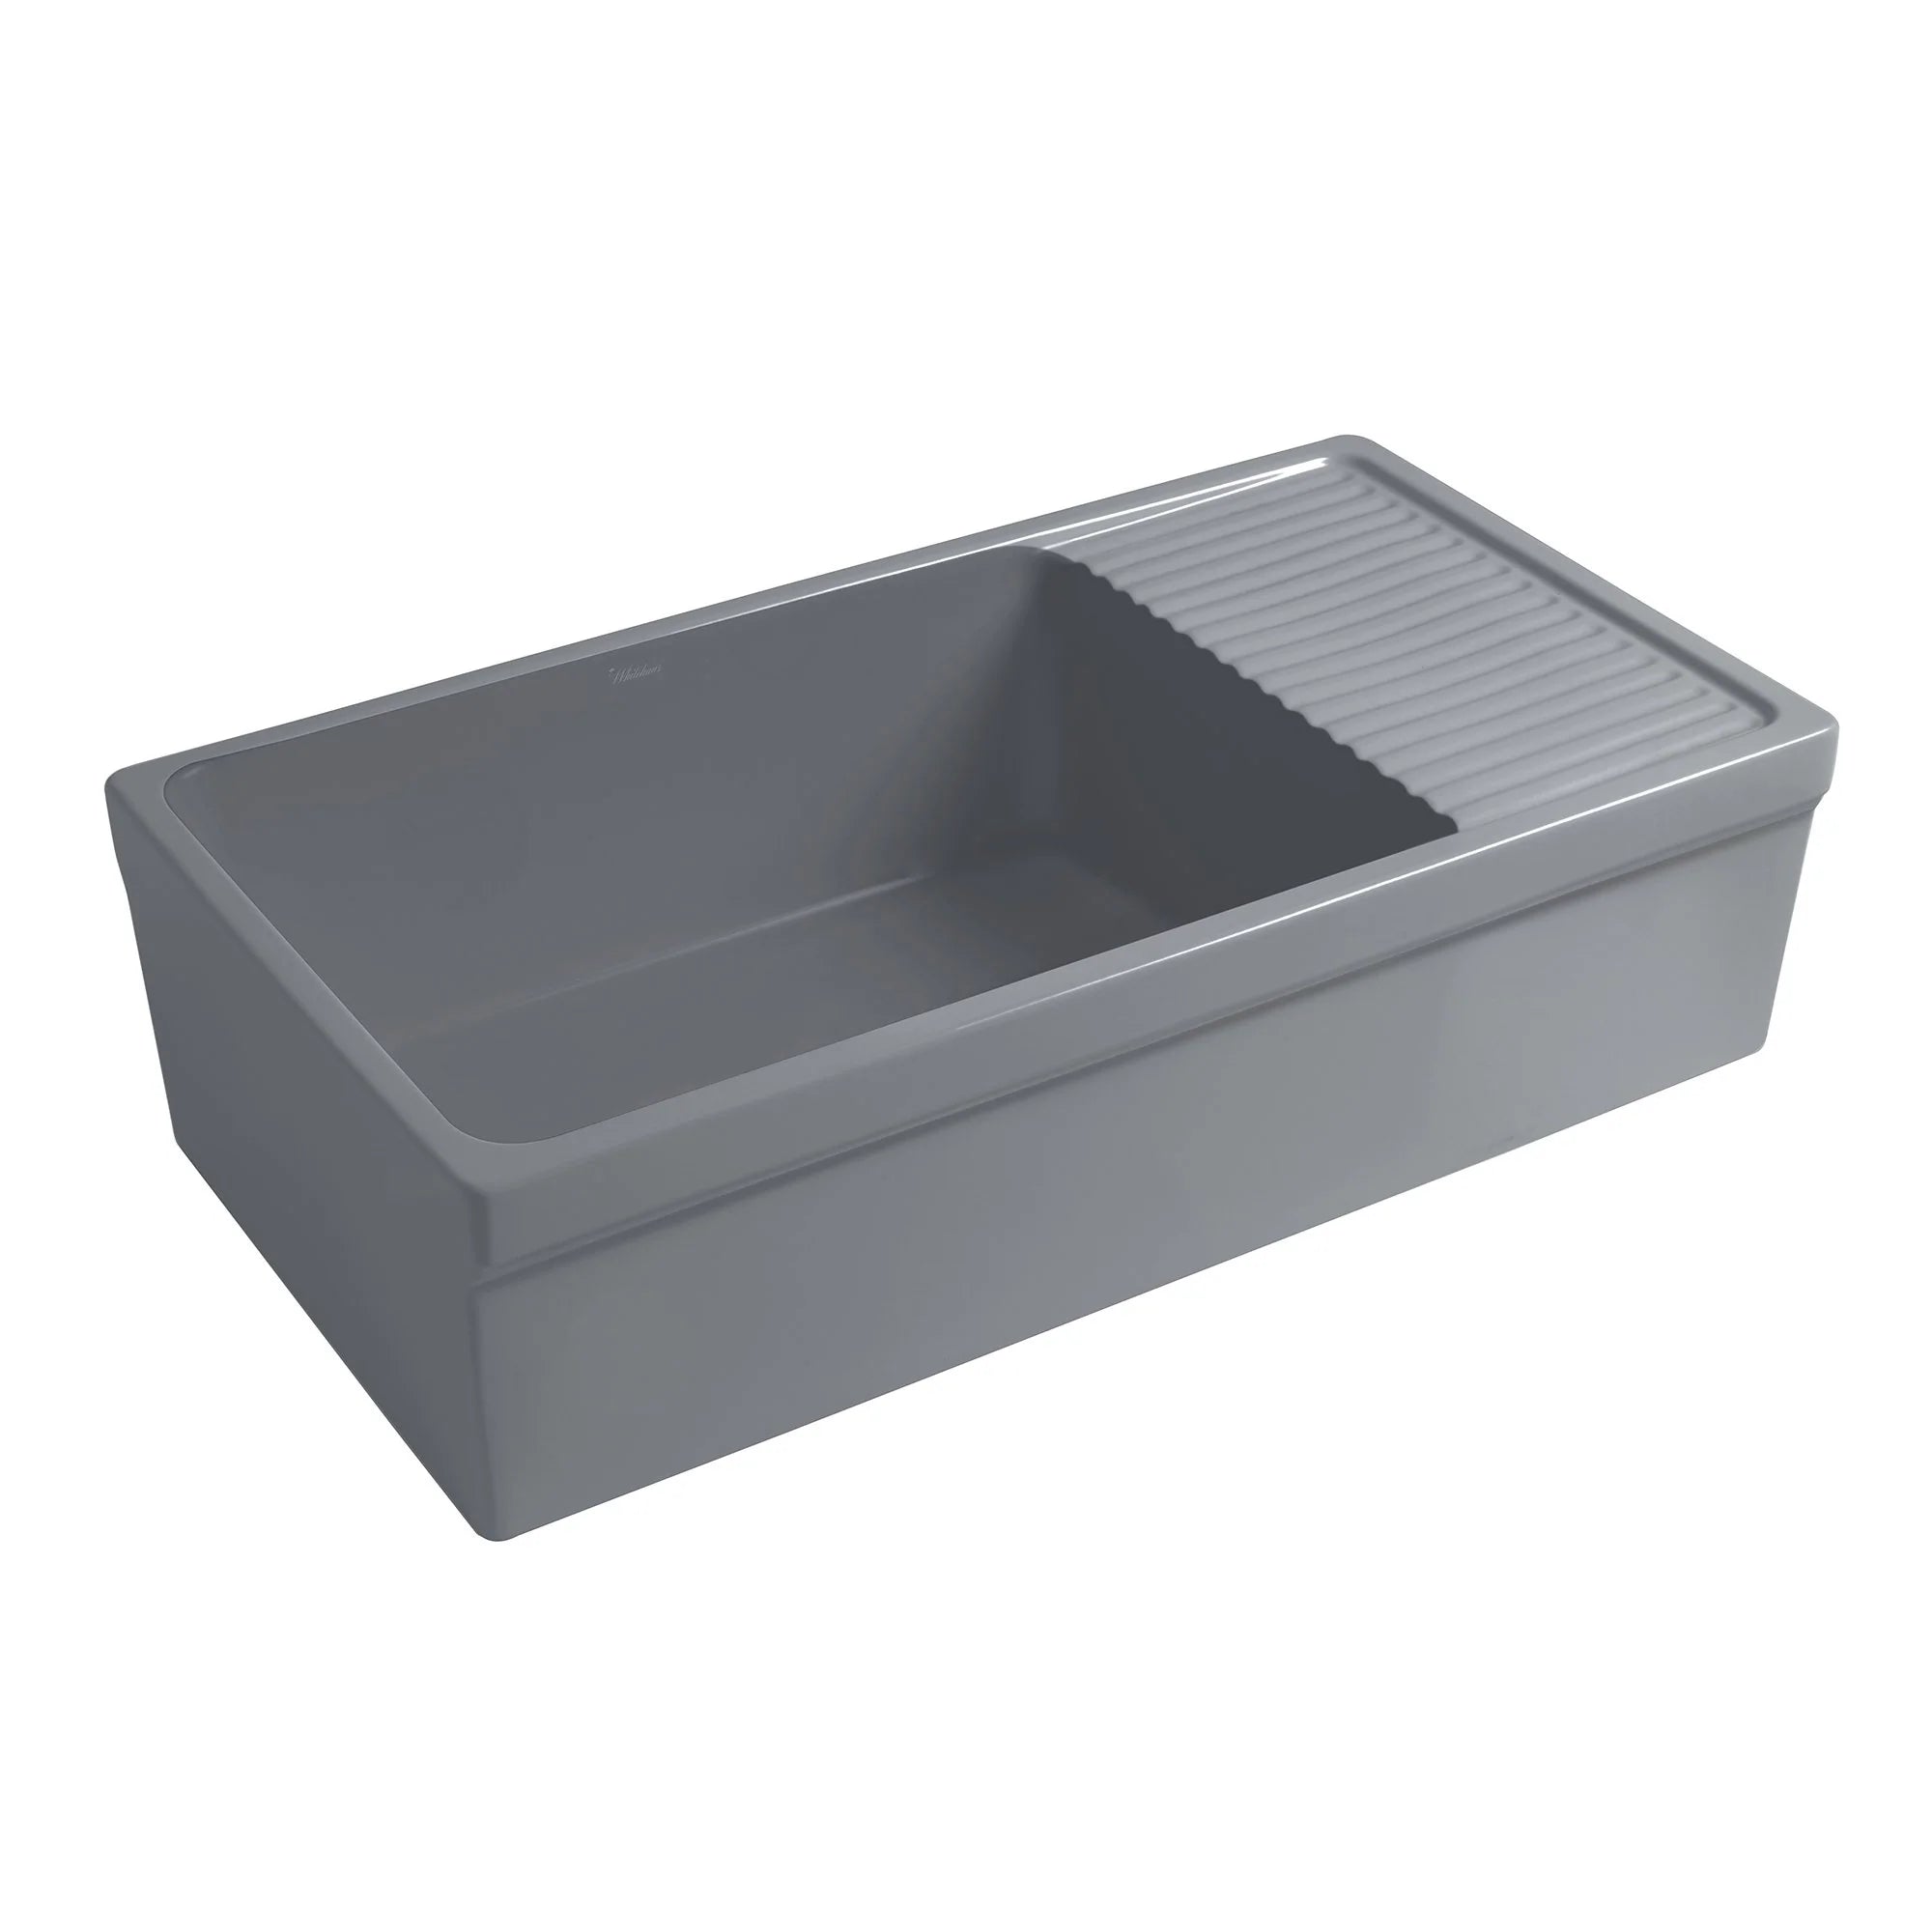 WHITEHAUS 36″ Quatro Alcove Large Reversible Fireclay Kitchen Sink with Integral Drainboard - WHQD540